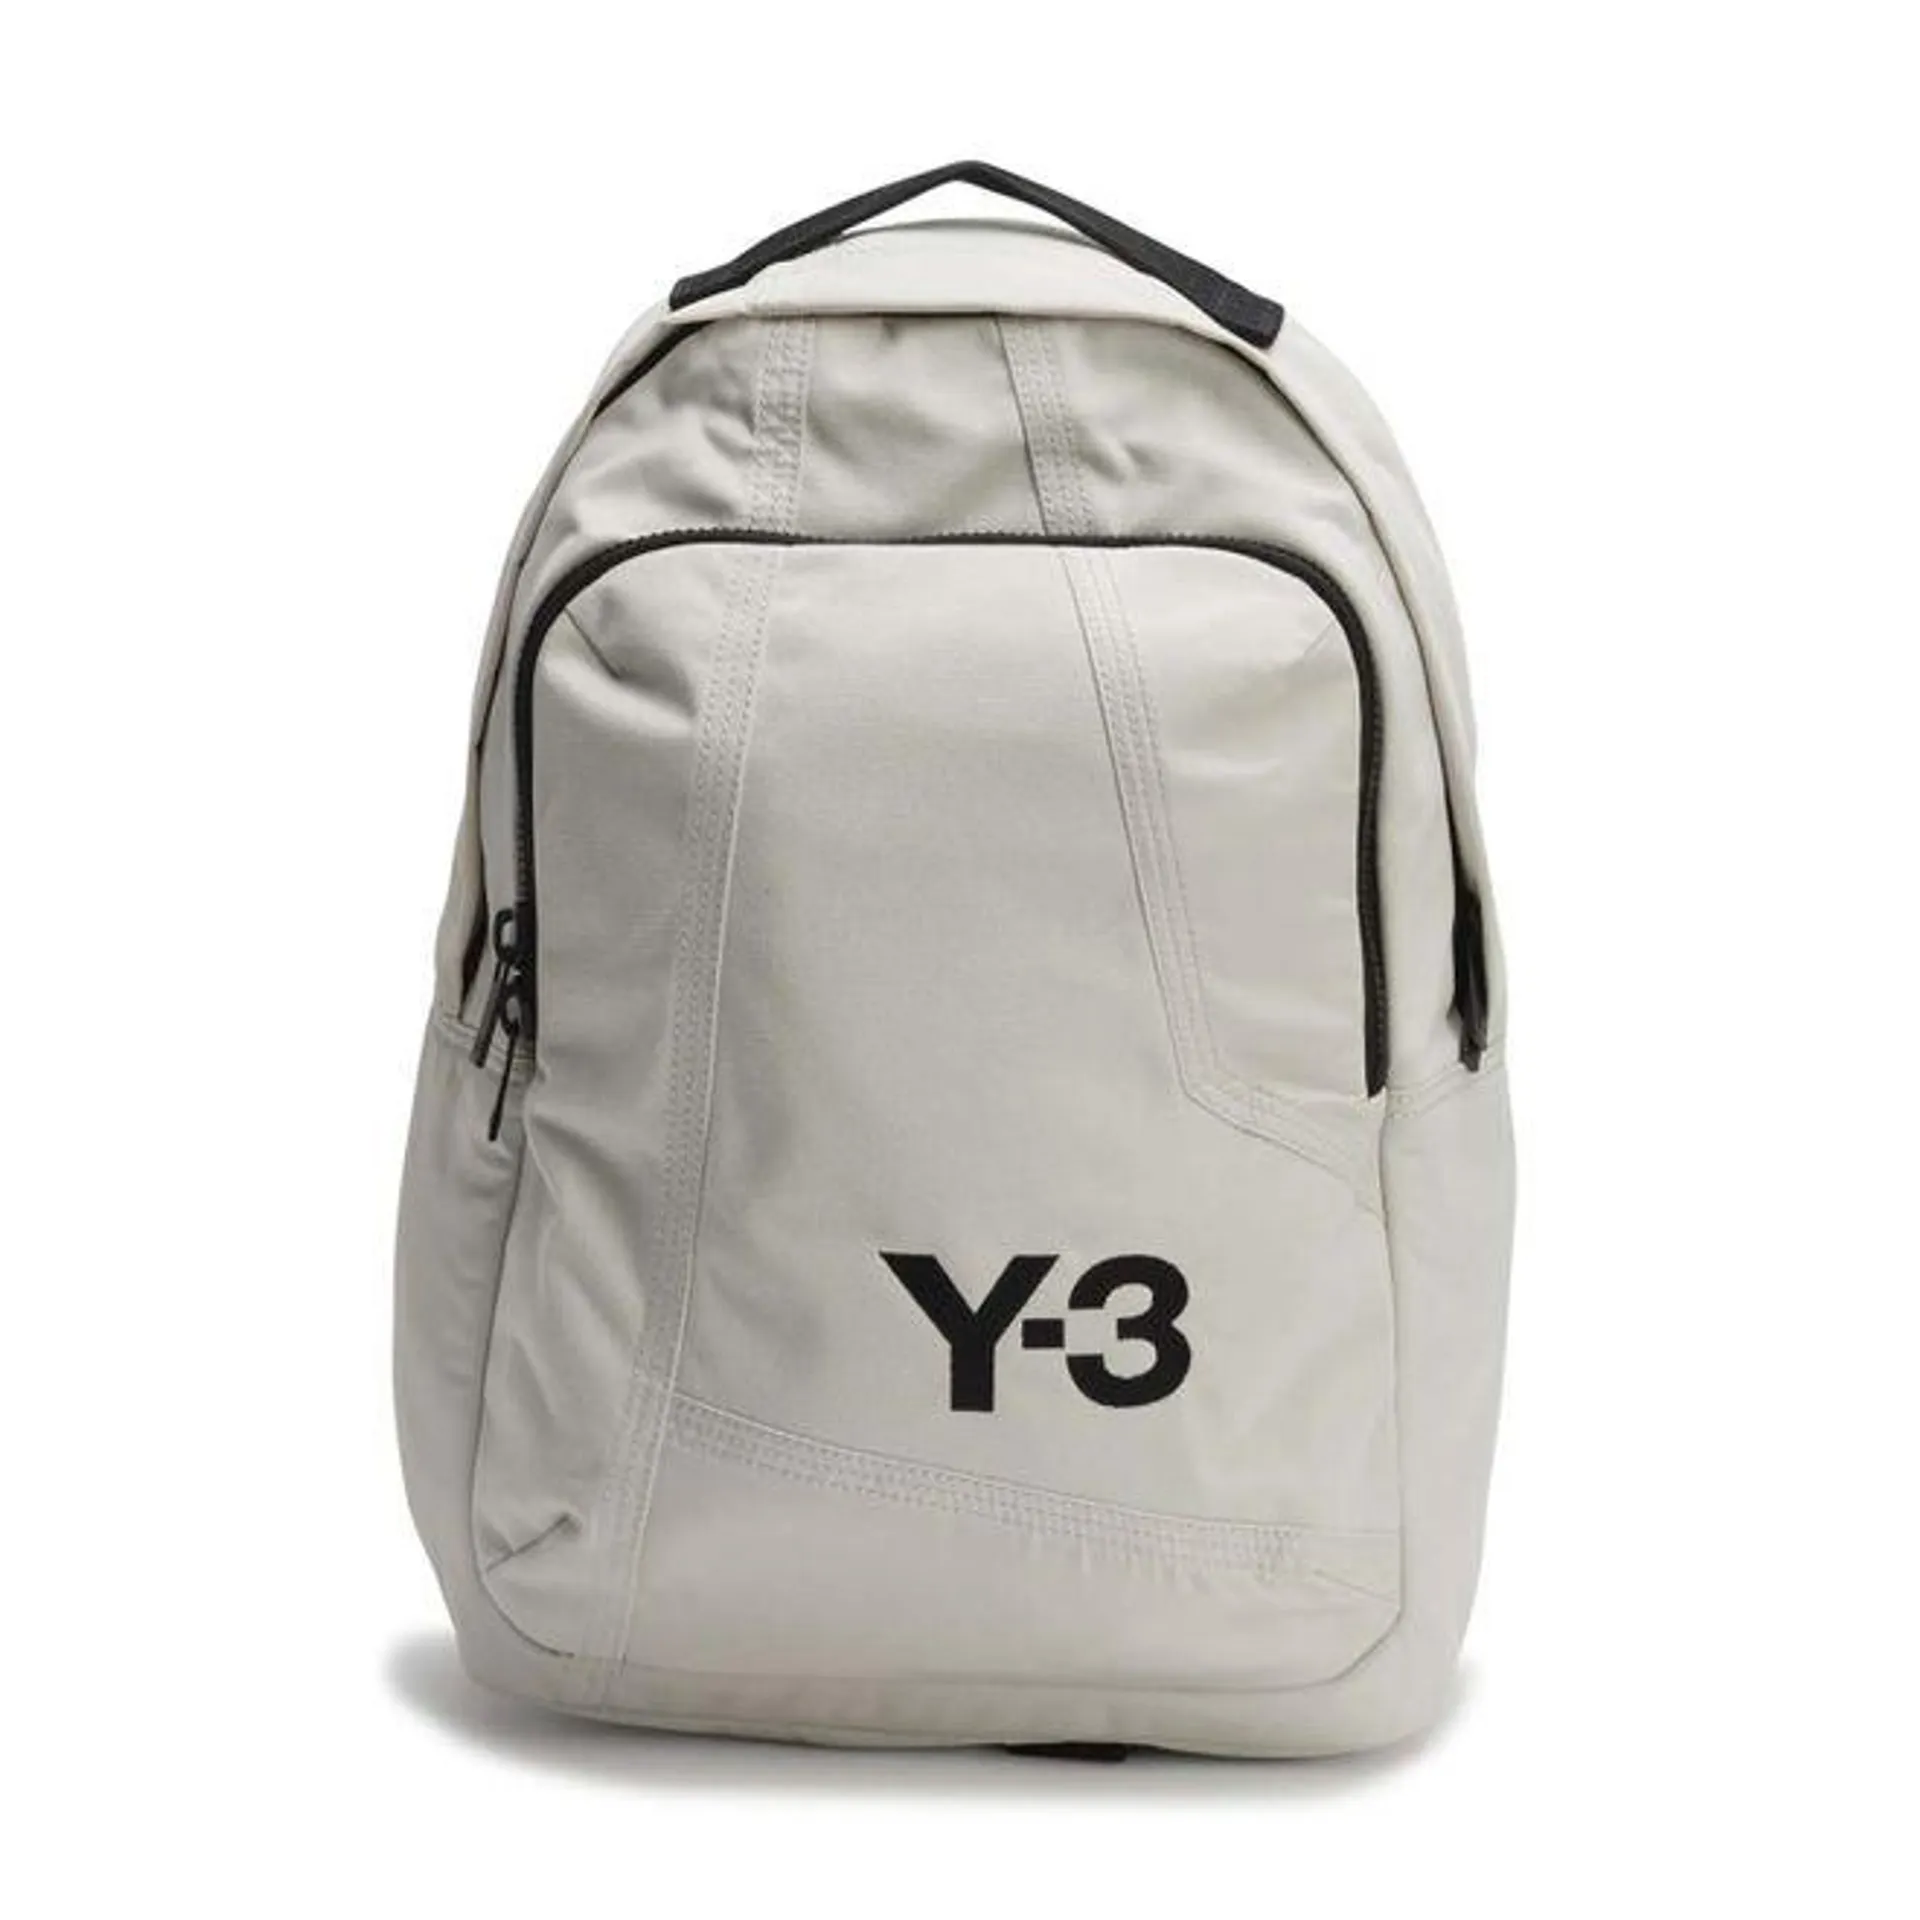 Y-3 Classic Backpack in Light Grey